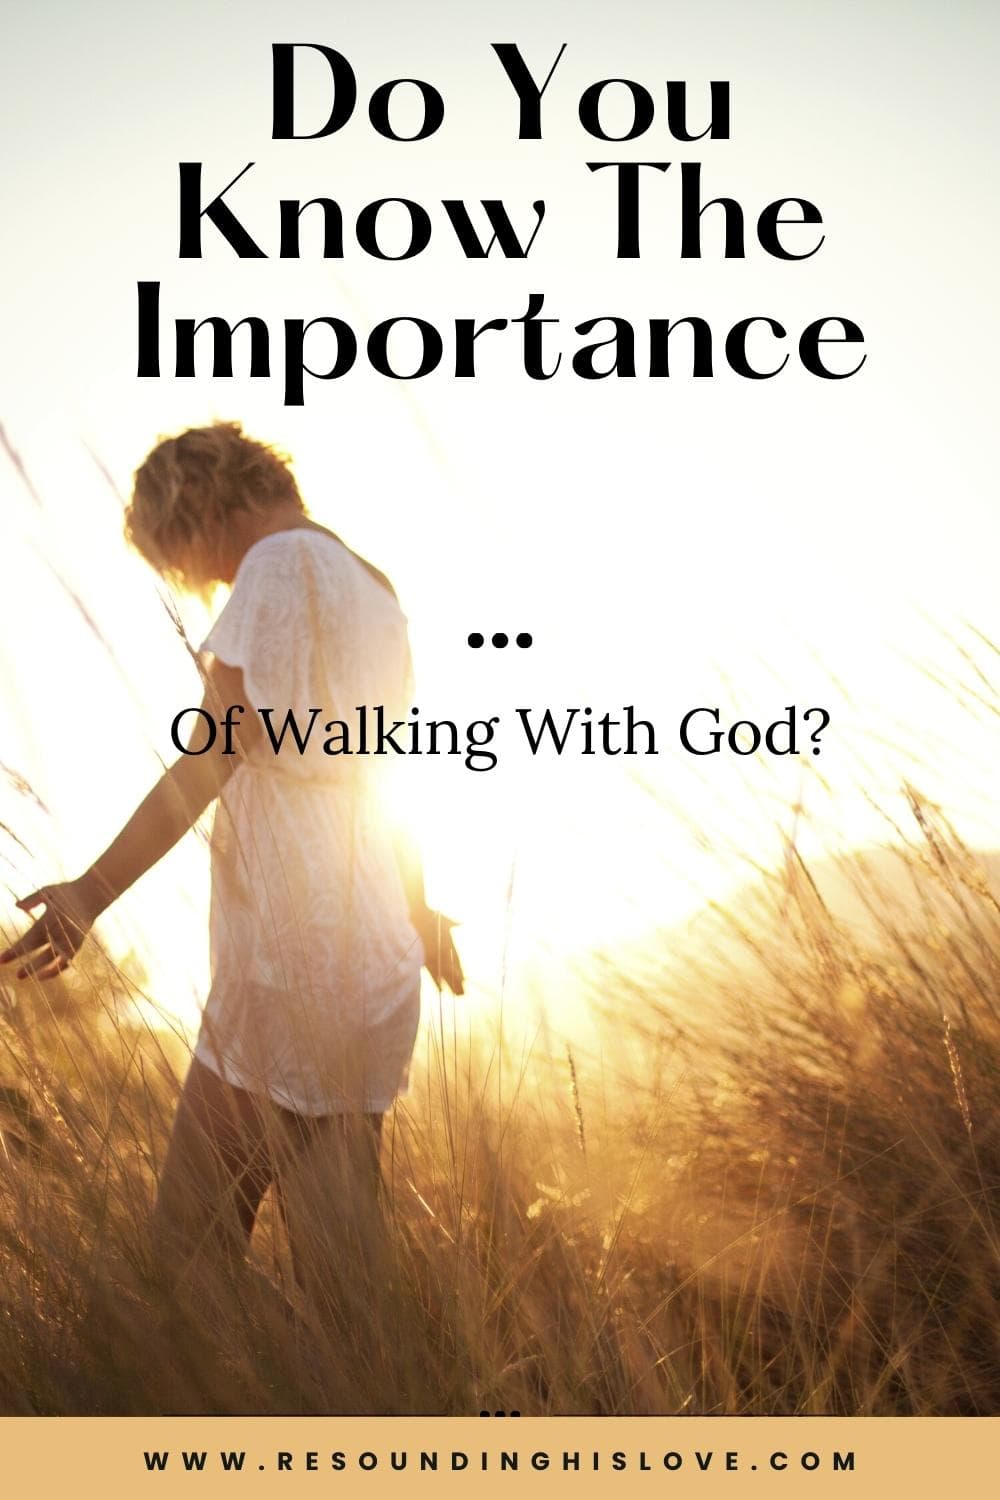 Do You Know The Importance Of Walking With God?